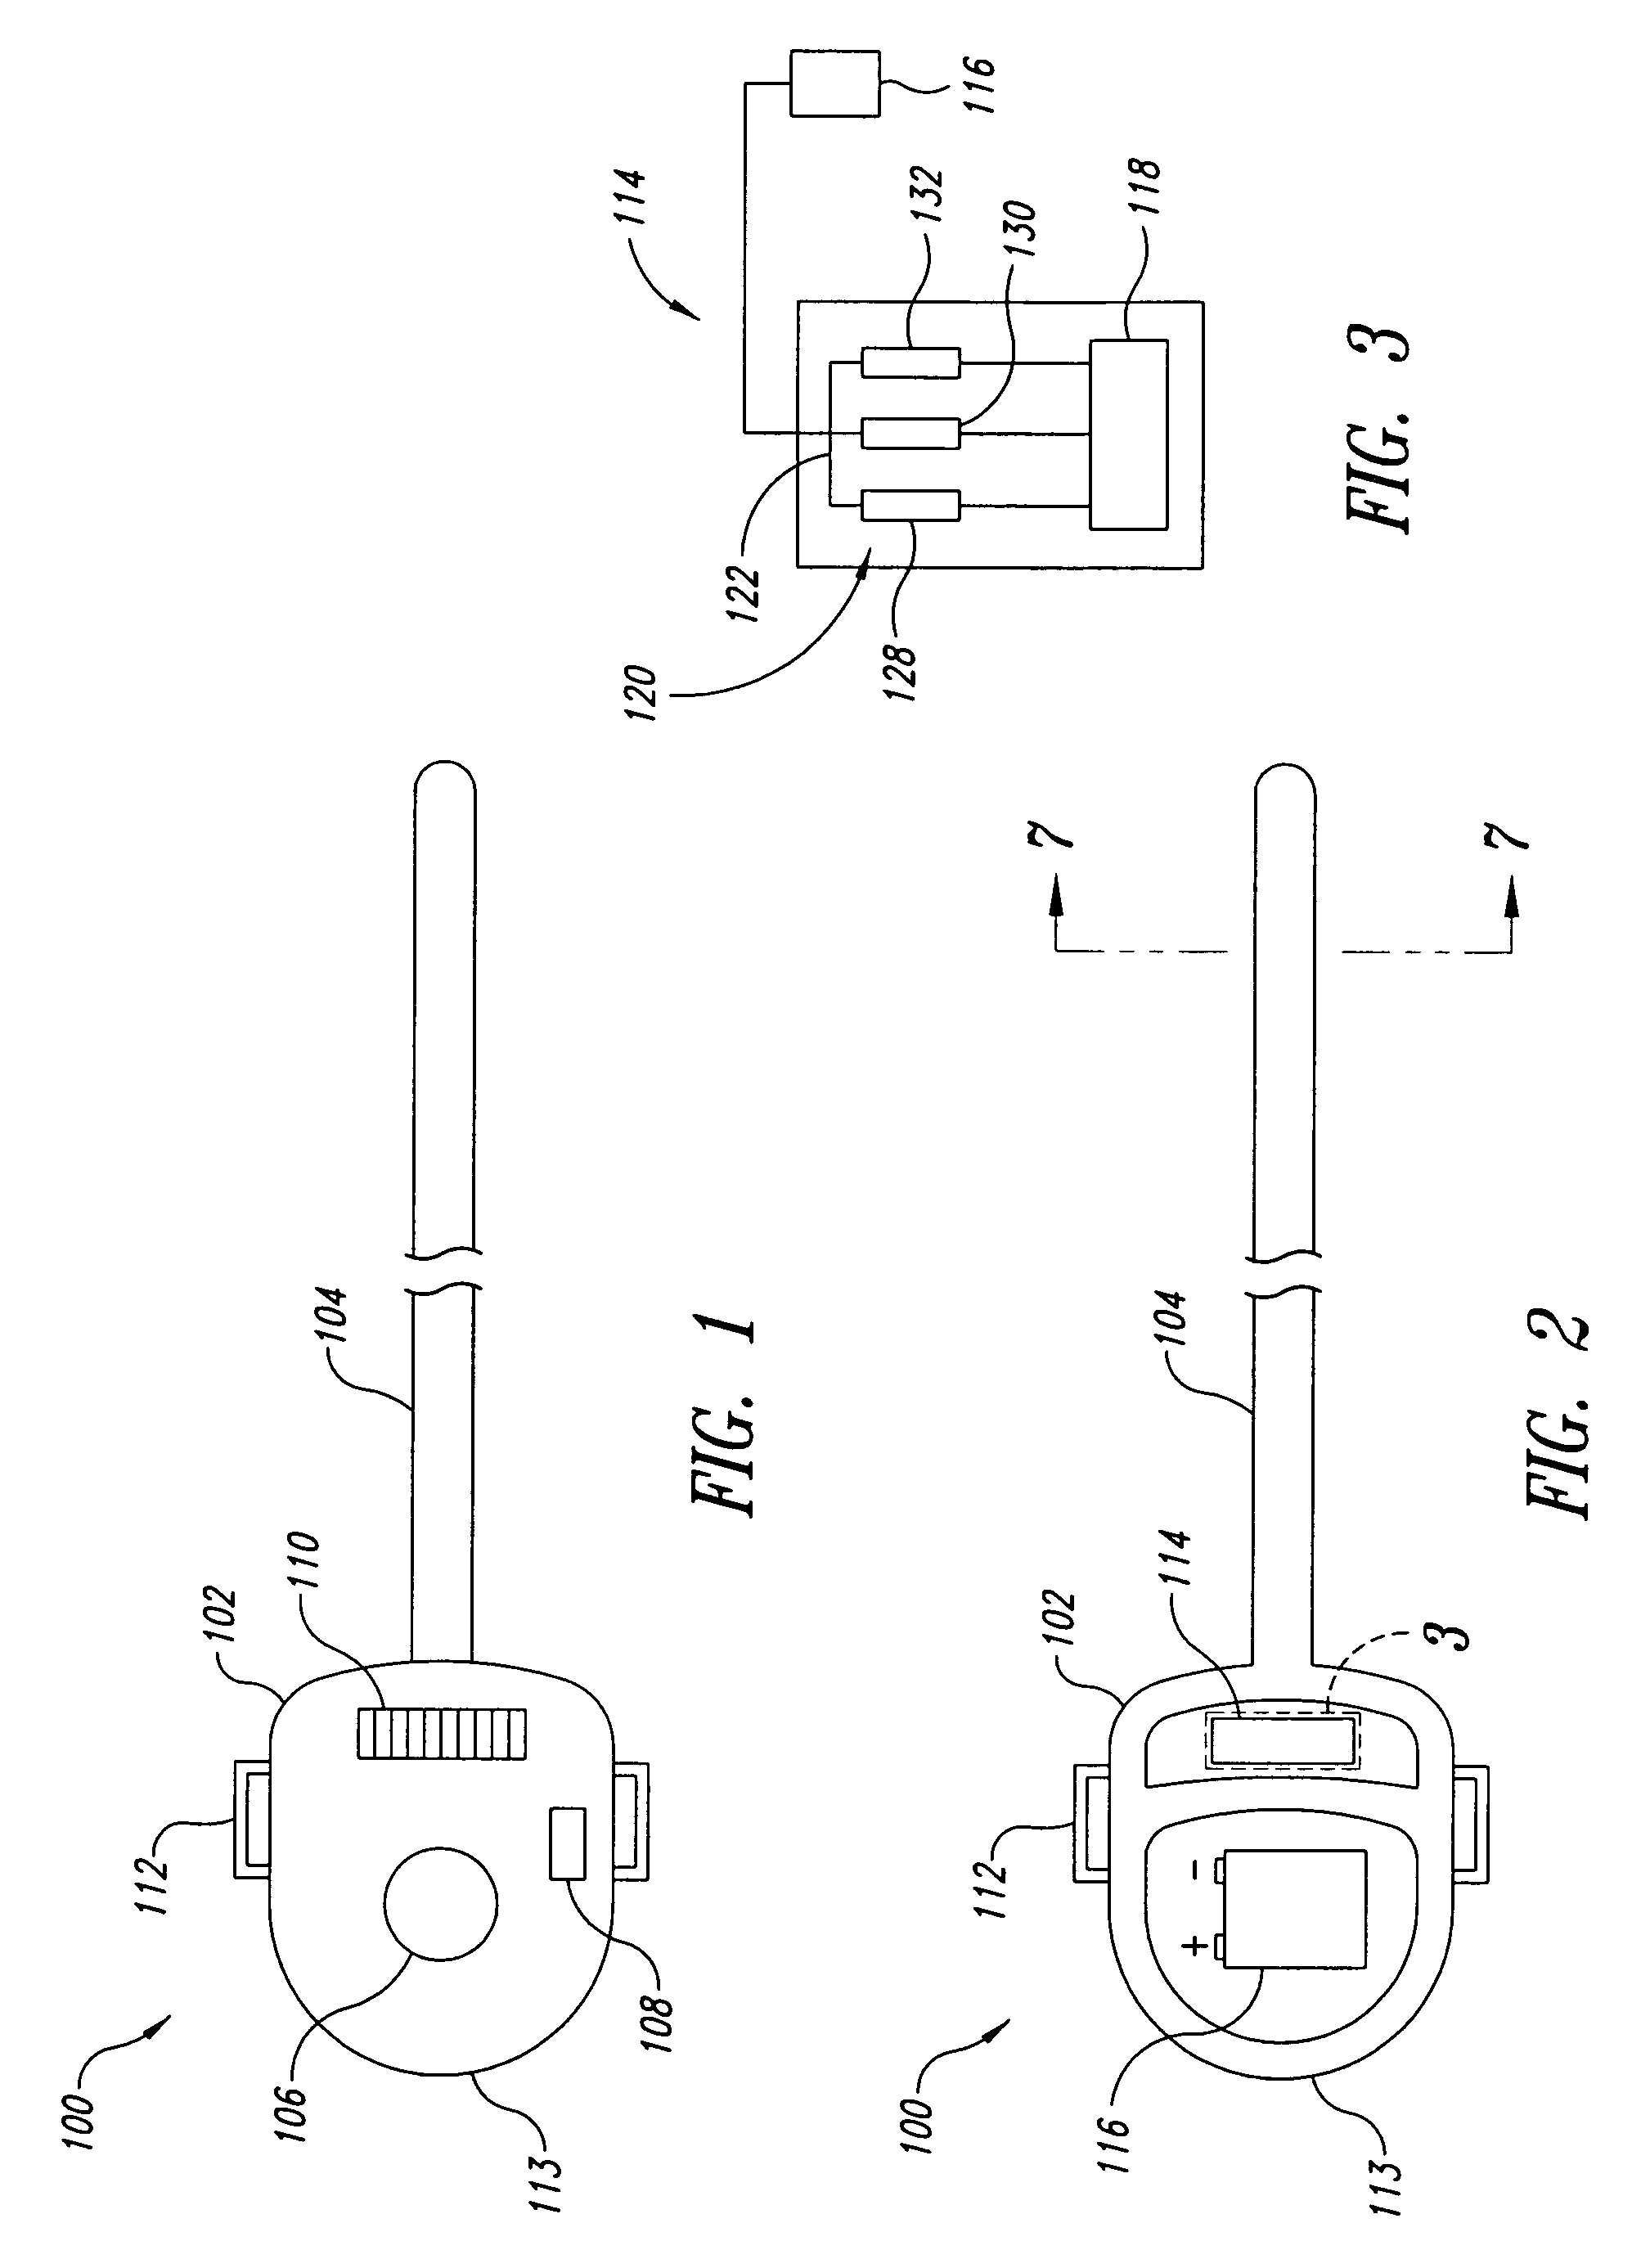 Light transmission system for photoreactive therapy